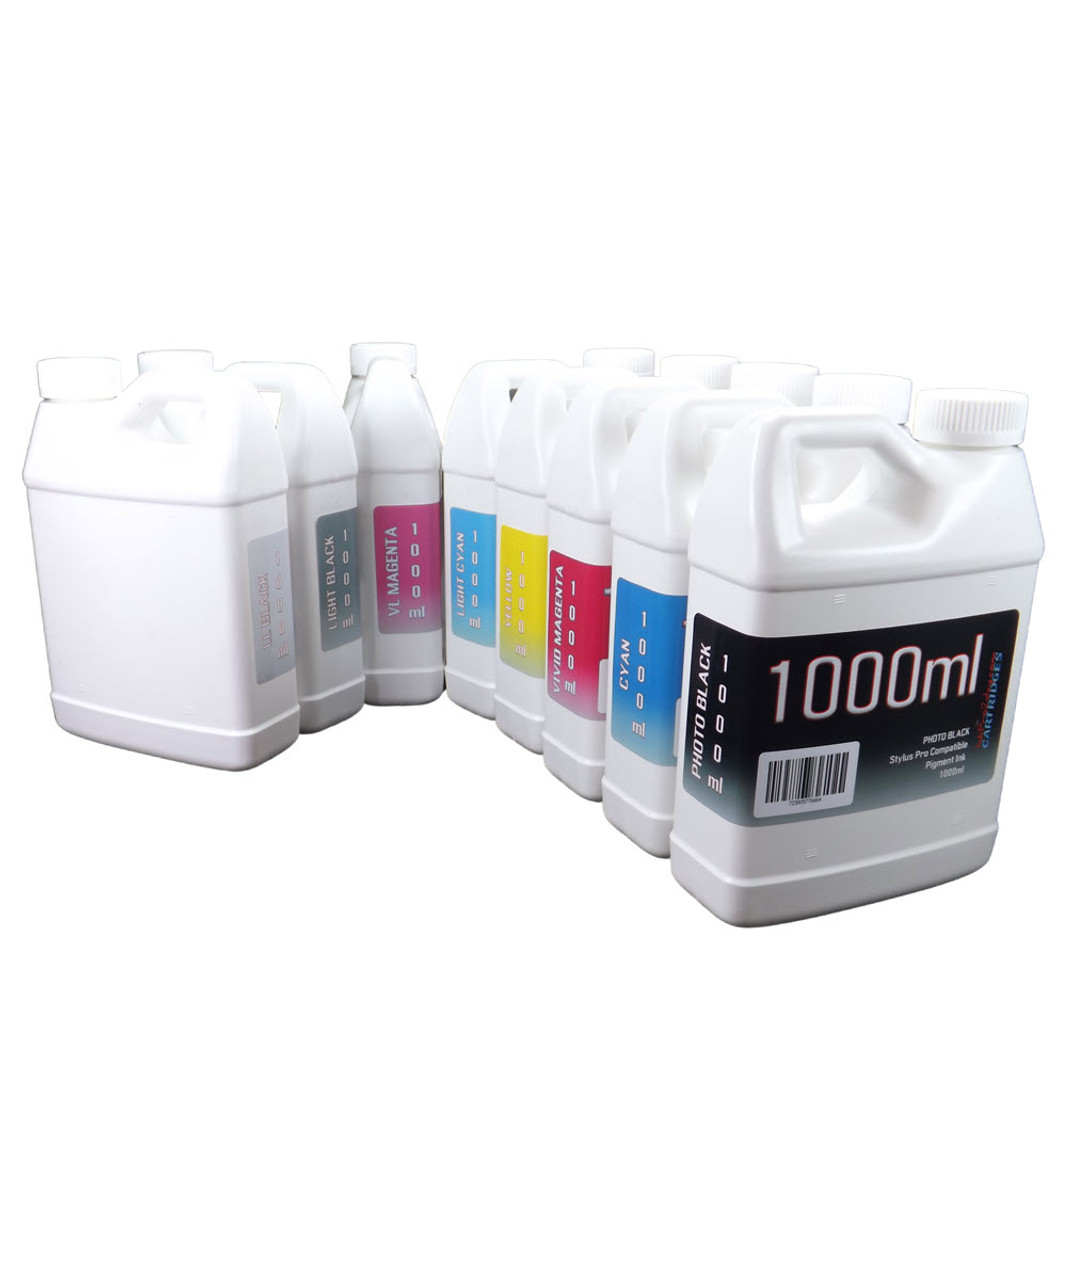 8- 1000ml Bottles Compatible UltraChrome K3 Pigment Ink for Epson Stylus Pro 7880 9880 Printers